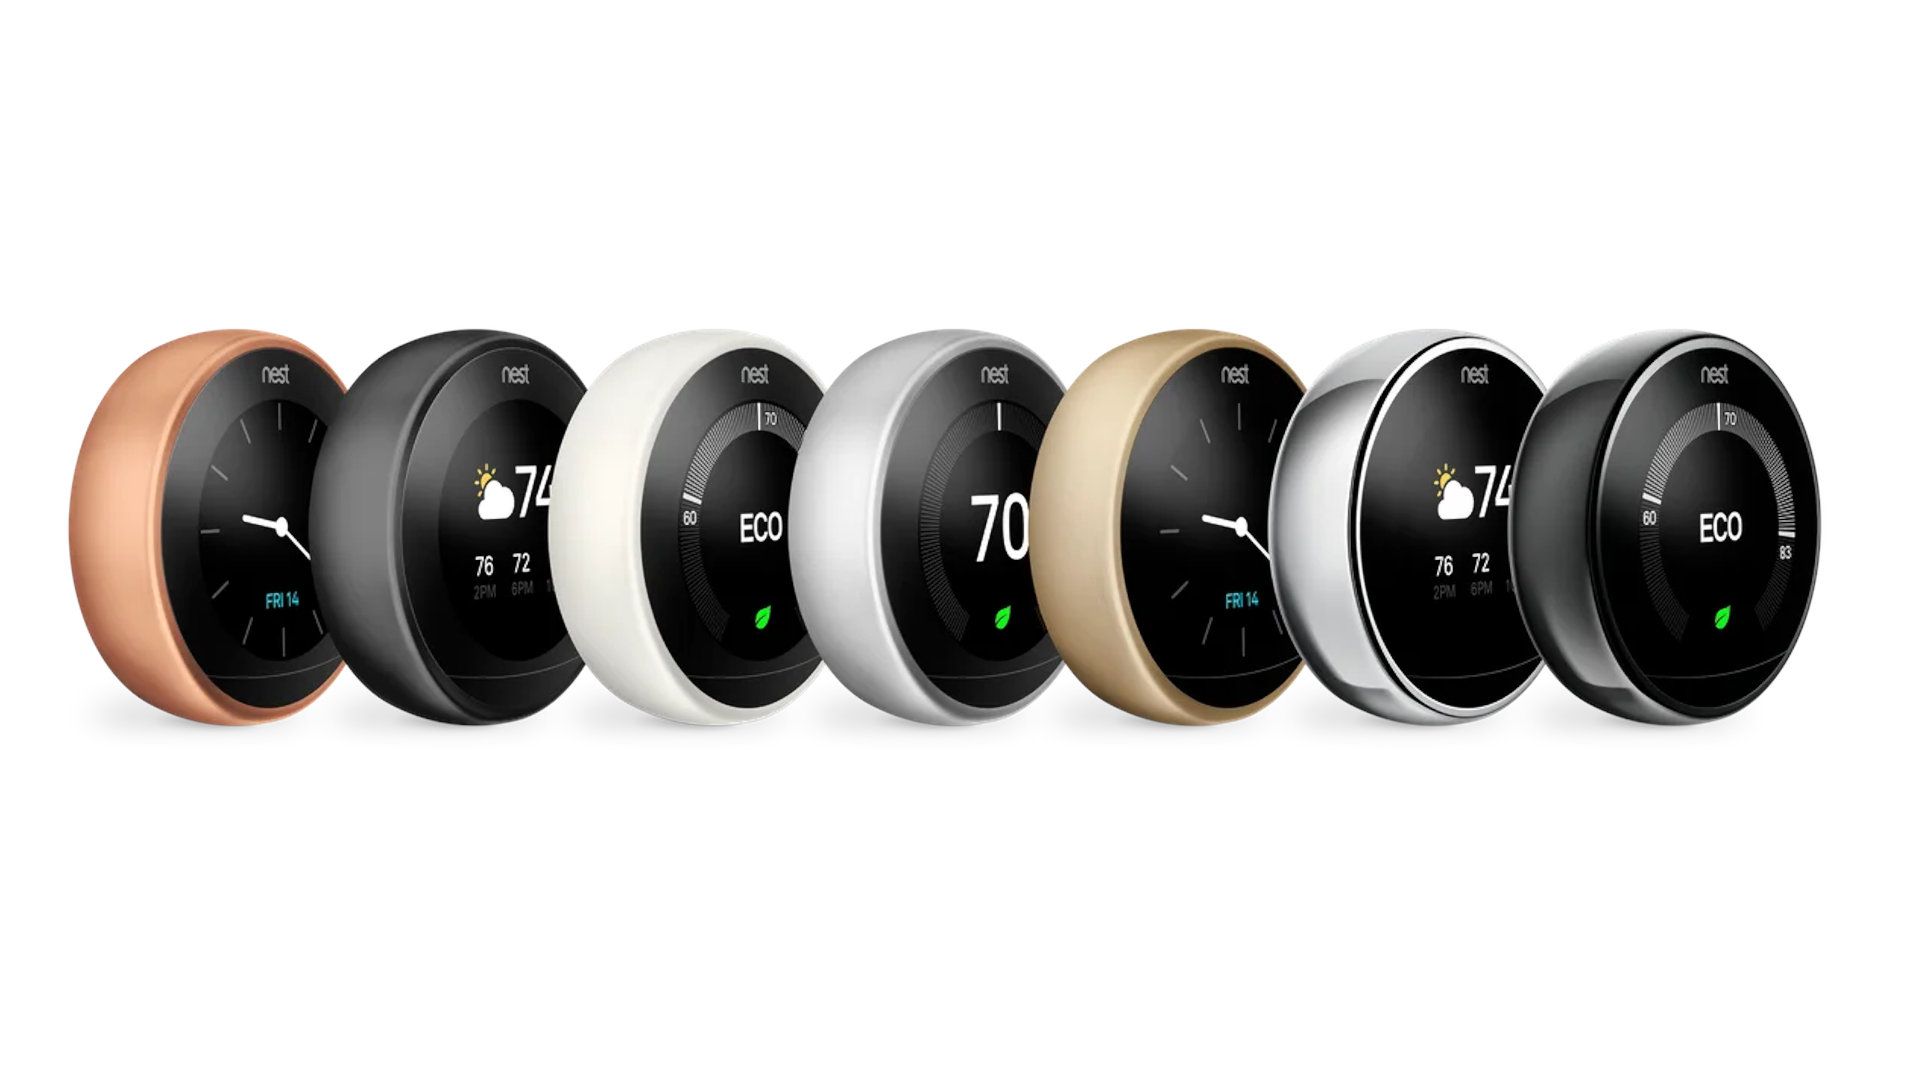 Recent Nest Learning Thermostats have large displays and steel bodies.